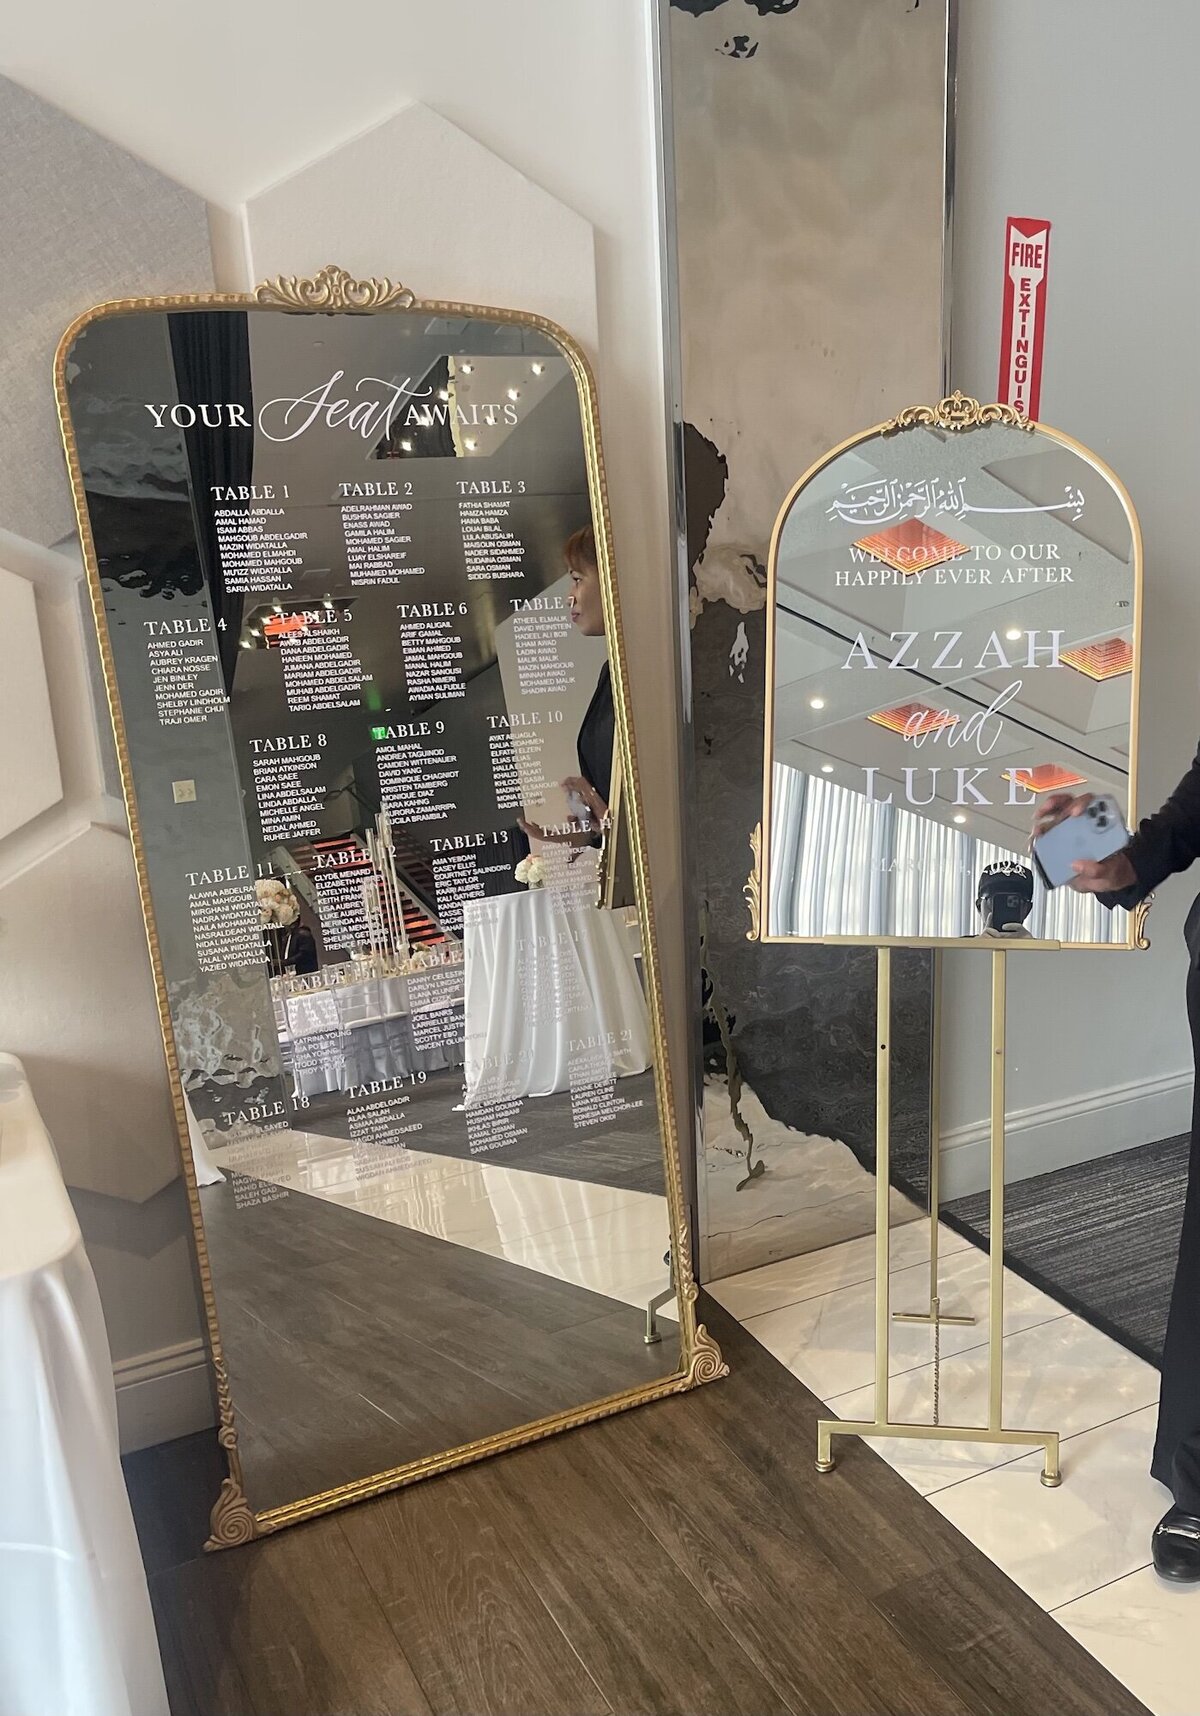 Full length arched mirror and smaller arched mirror rental for a wedding seating chart and welcome sign in the Bay Area